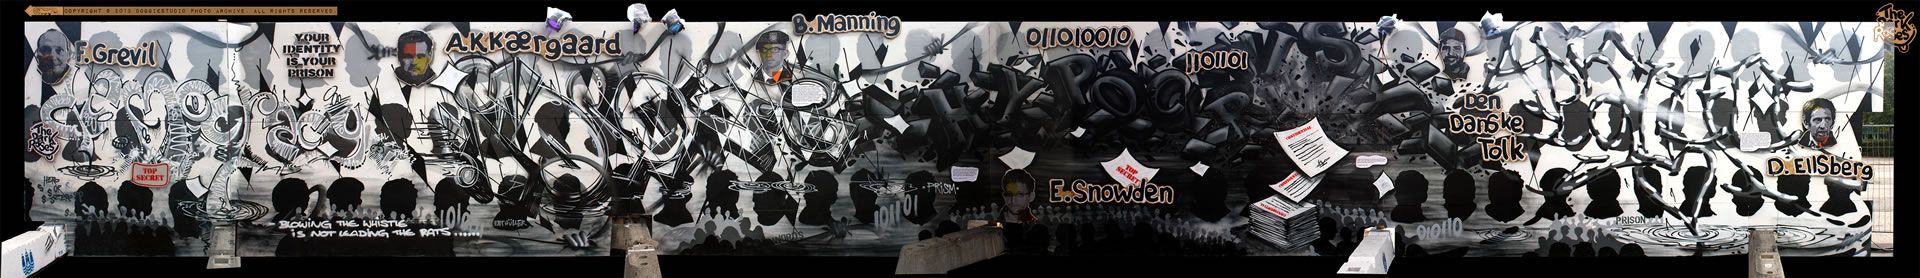 ★ Hero or Traitor? ★ Who to questionnaire or who to trust in matter of mass surveillance is for your own good?.. by Aim 1, Avelon 31, DoggieDoe, More, Motus and Nexr - The Dark Roses - GALORE Urban Art Festival, Toftegårds Plads, Valby, Copenhagen, Denmark August 2013